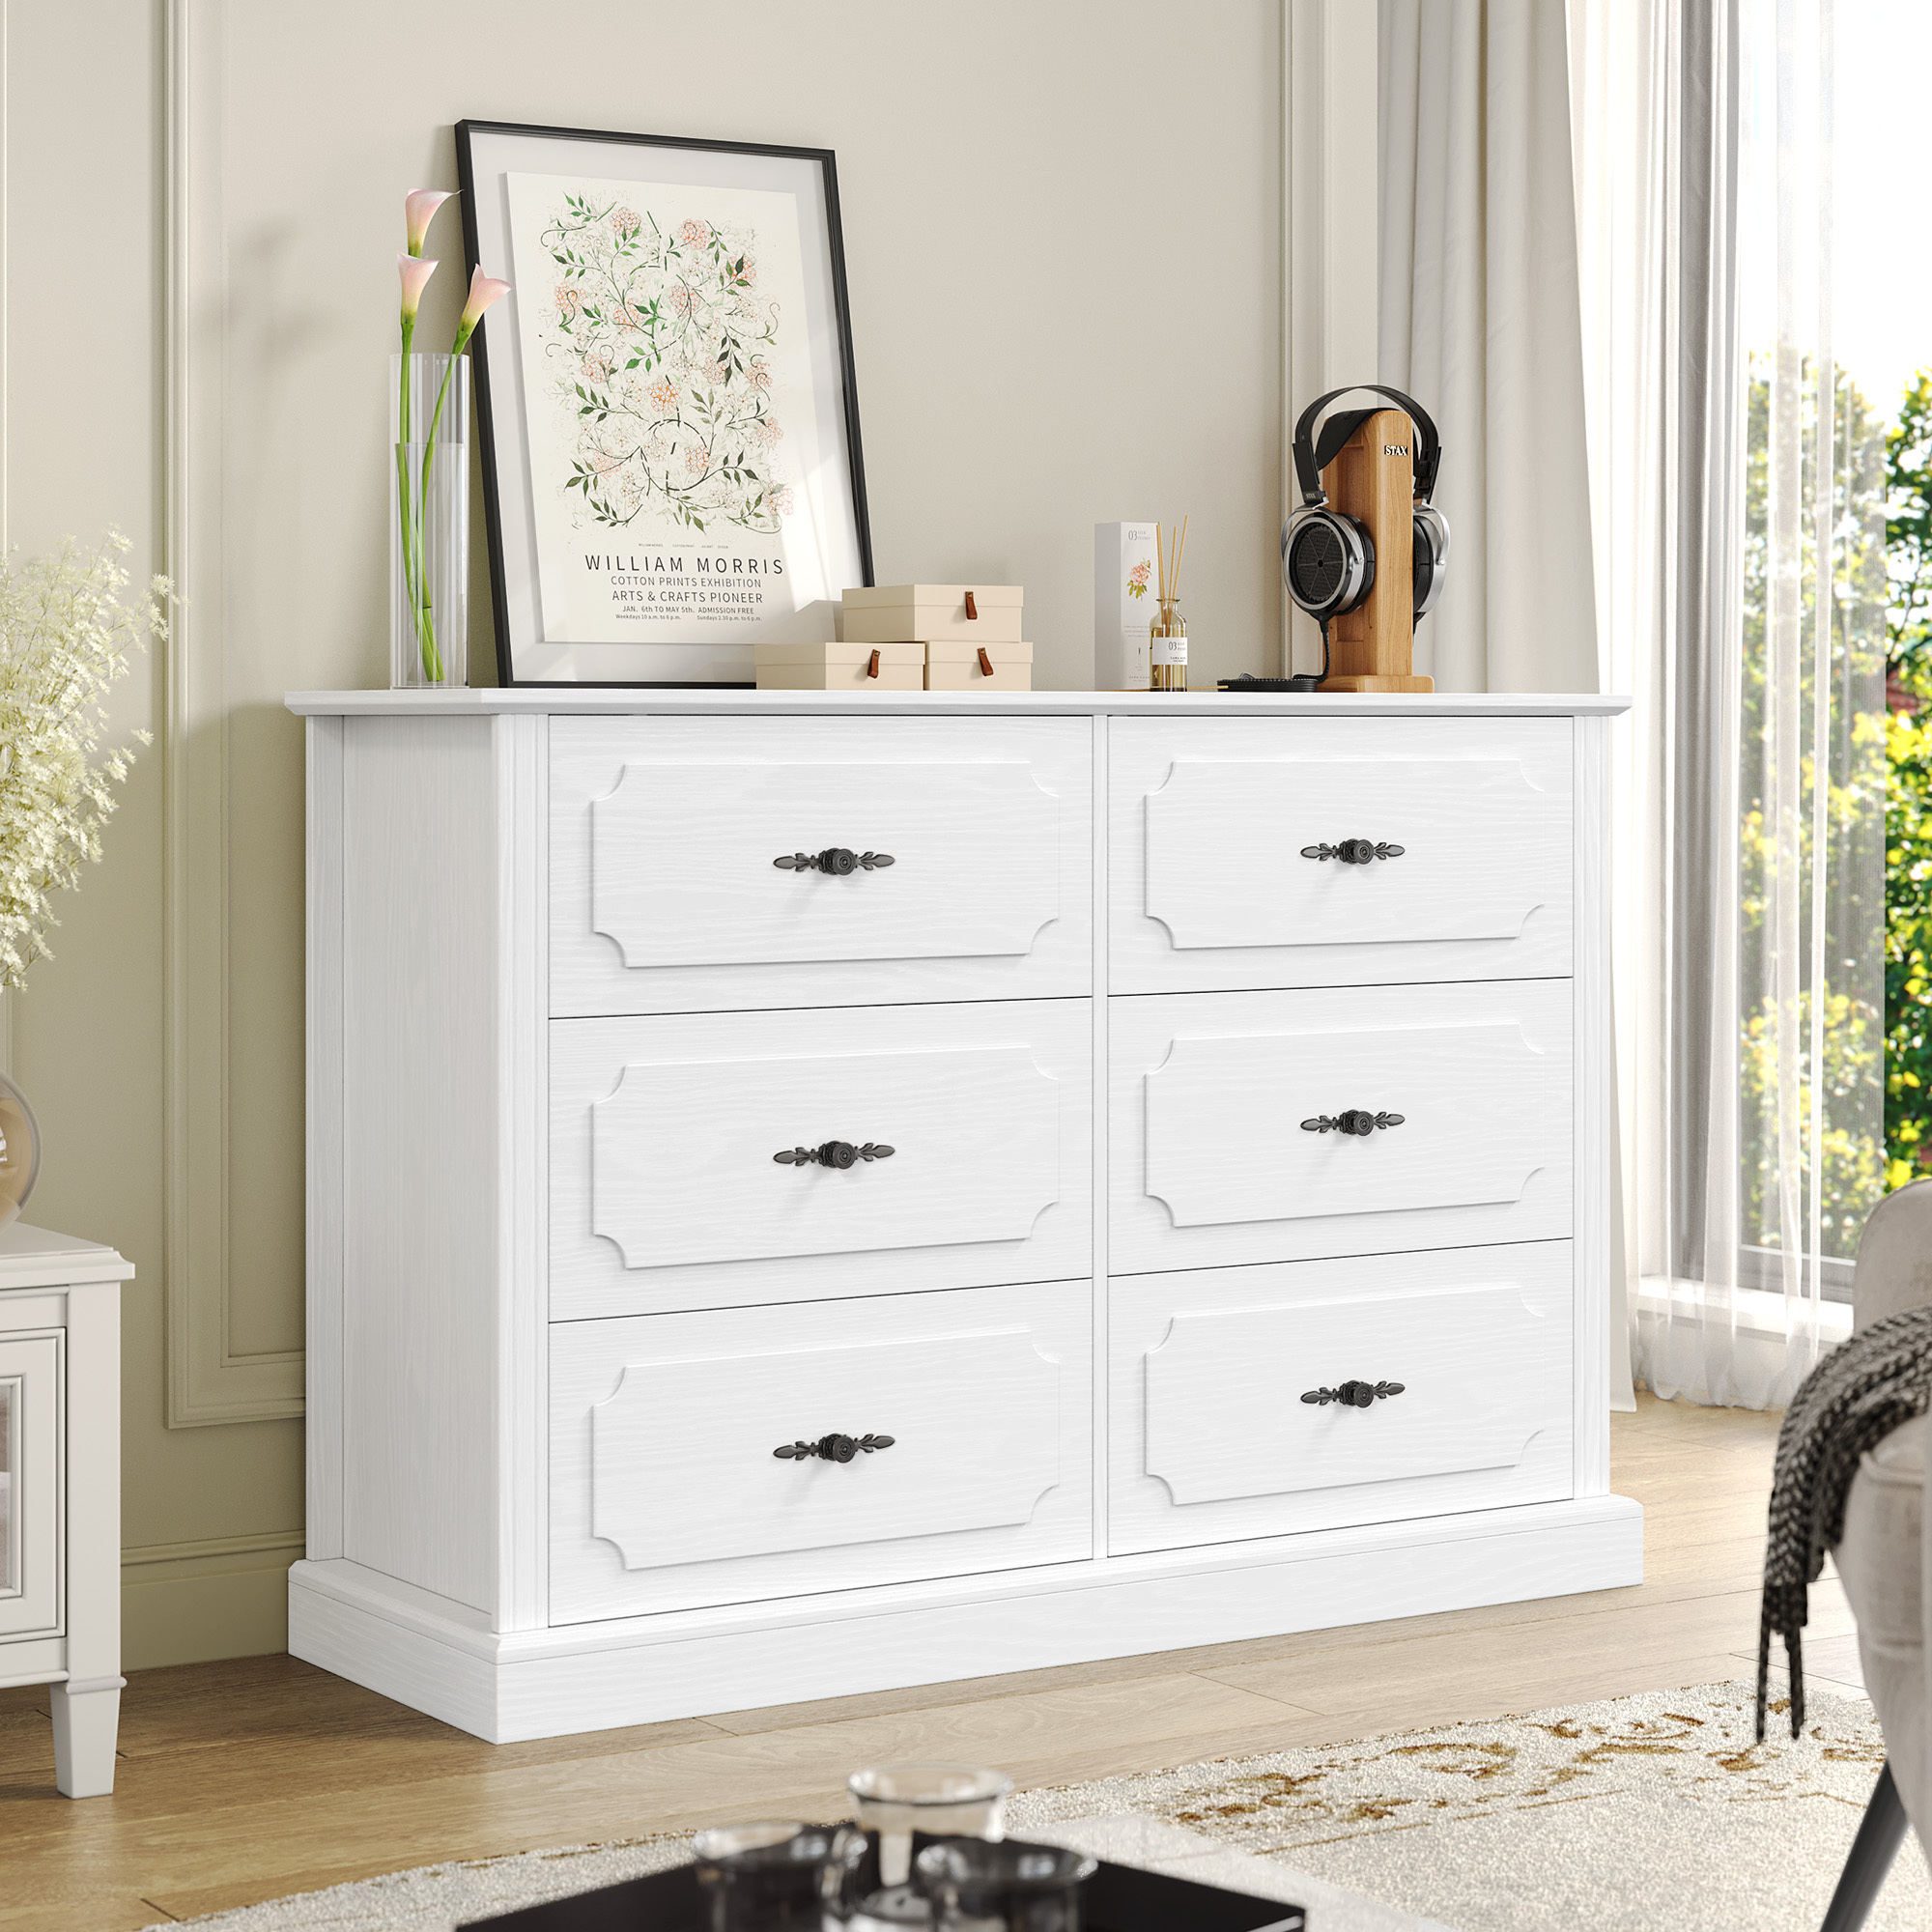 Homfa 6 Drawer White Double Dresser for Bedroom, Classic Wood Storage Cabinet for Living Room with Wide Top - image 1 of 7